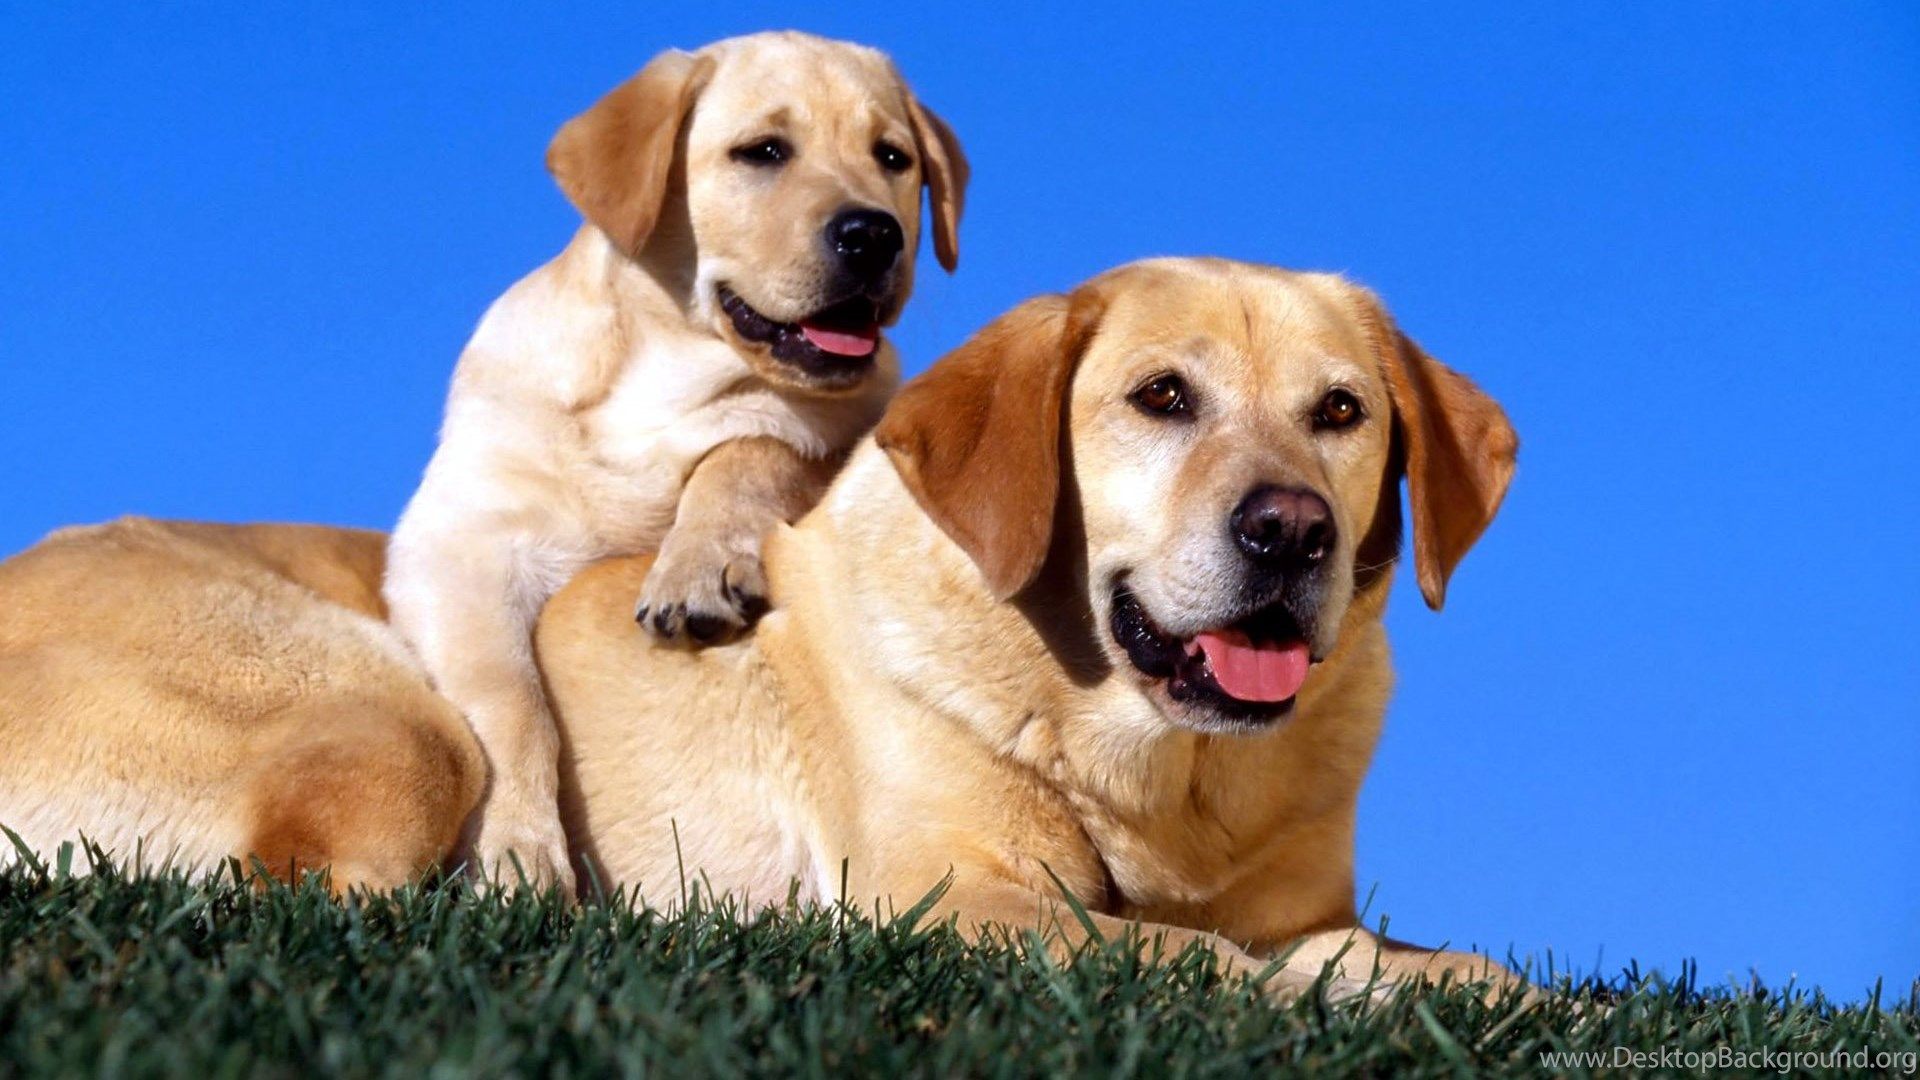 Puppies And Mom Dog Wallpaper HD .desktopbackground.org